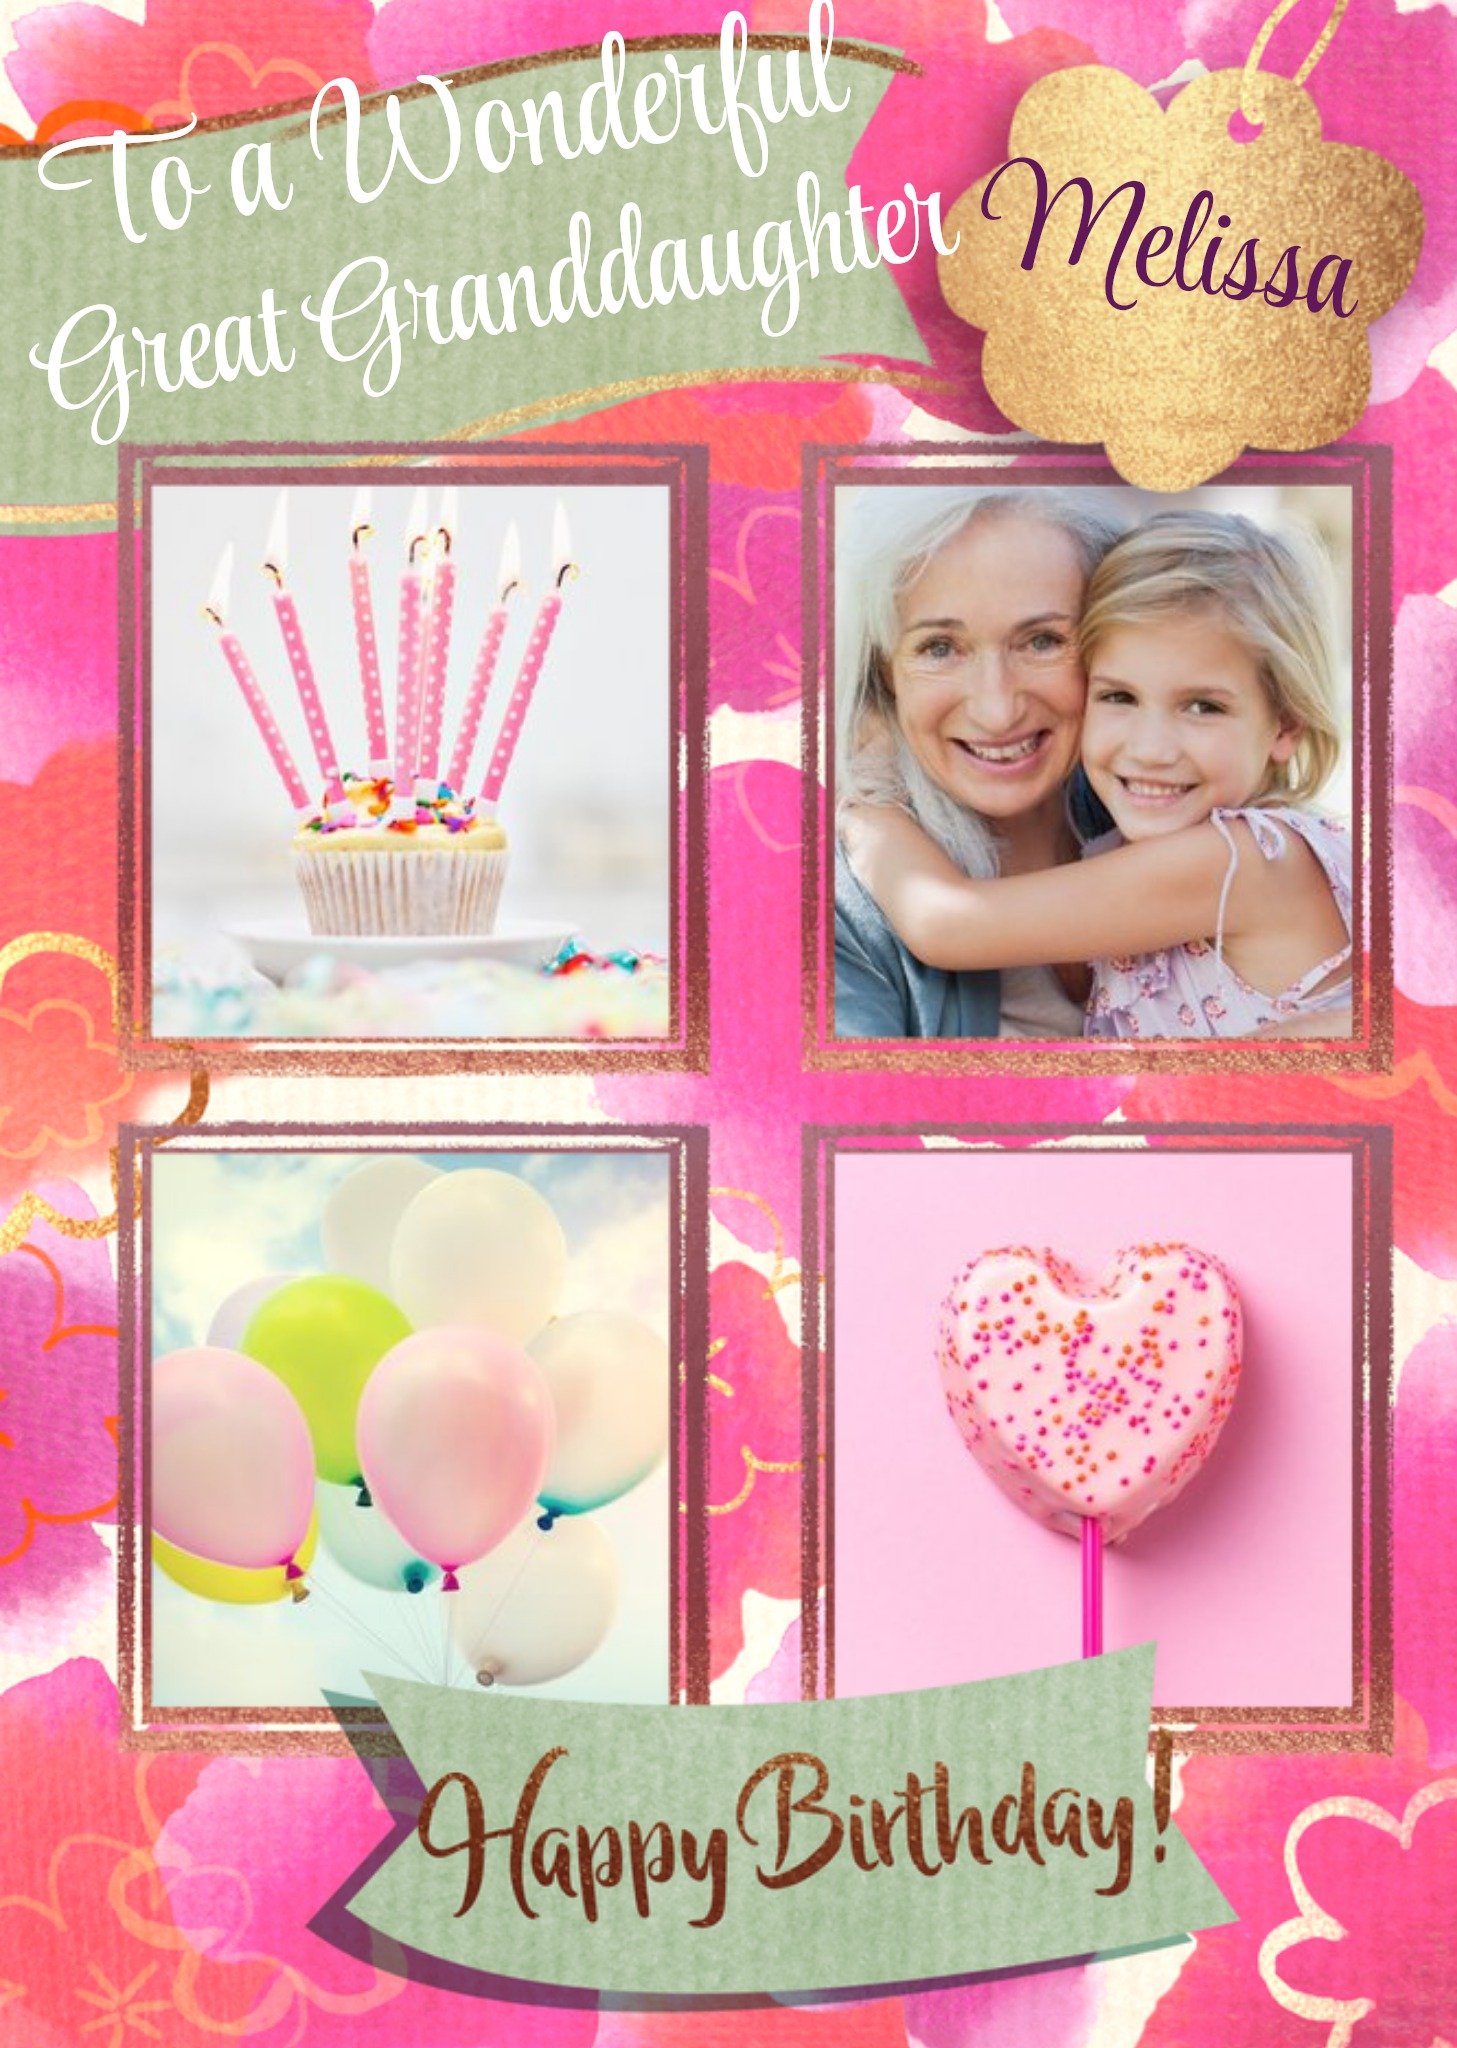 Moonpig To A Wonderful Great Granddaughter Photo Upload Birthday Card, Large